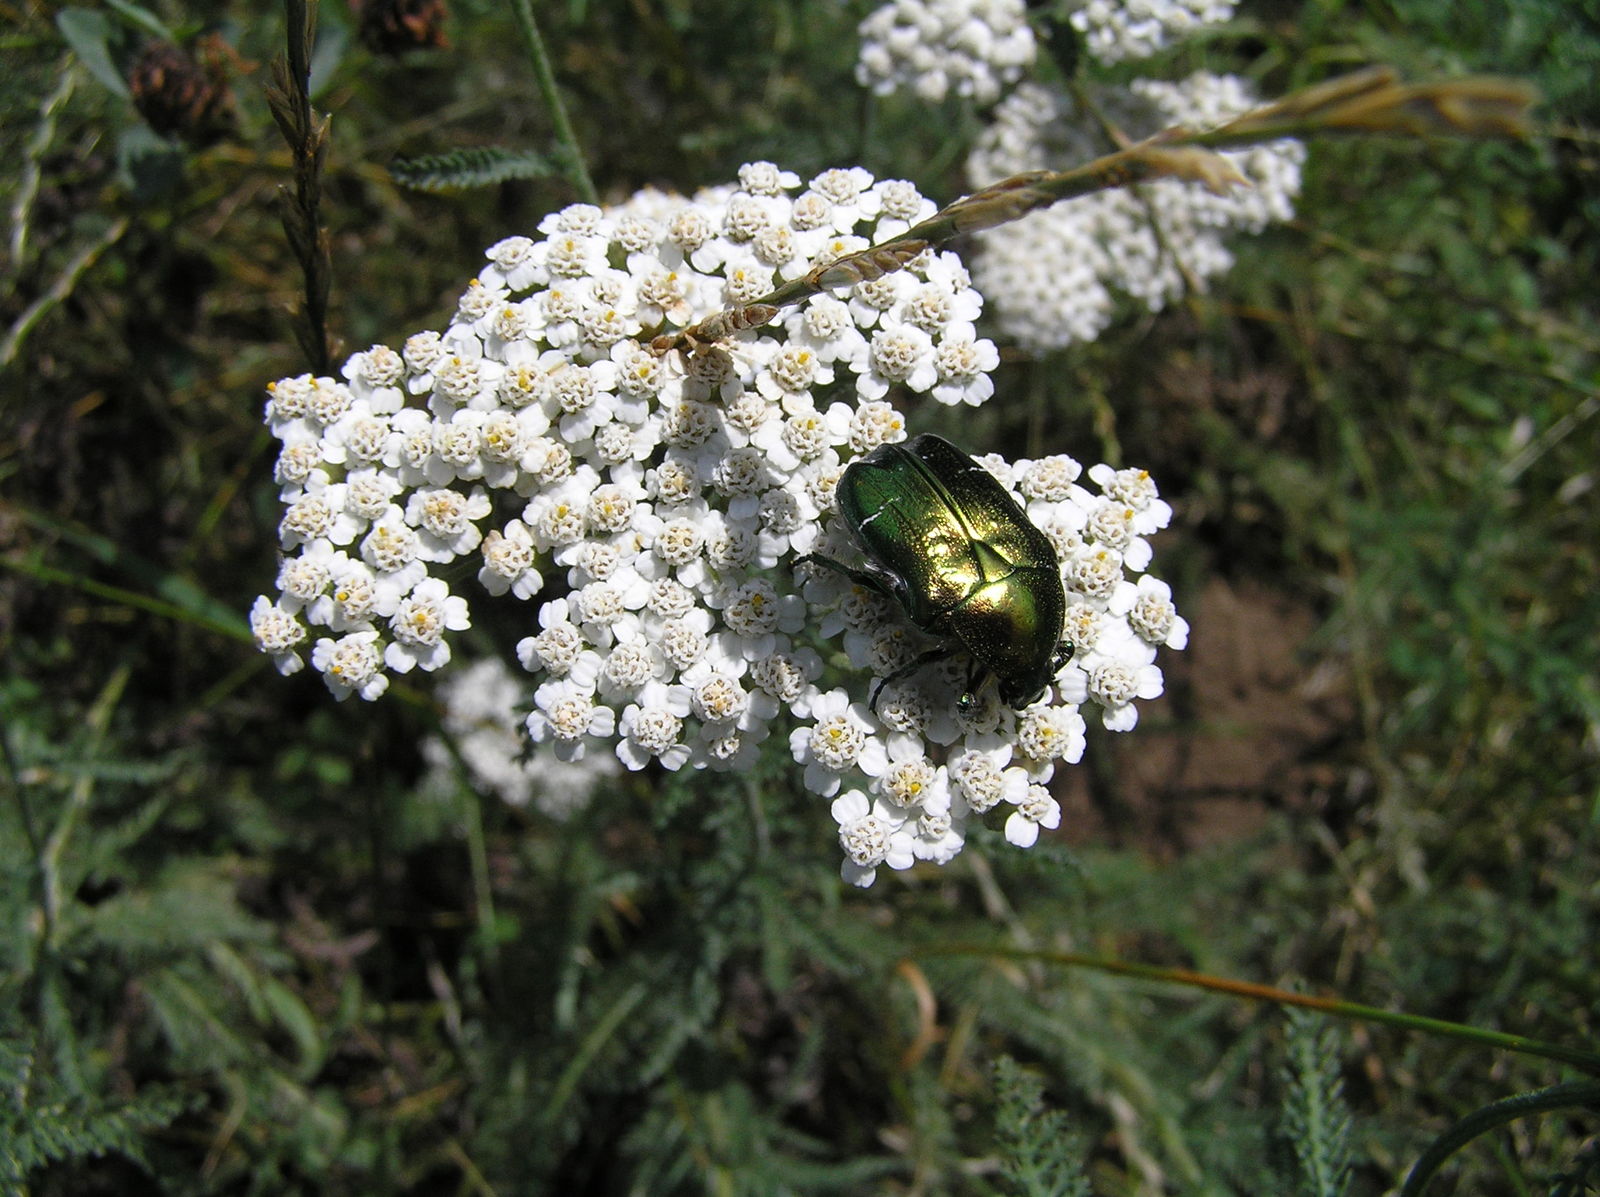 a closeup of a flower and insects with white petals